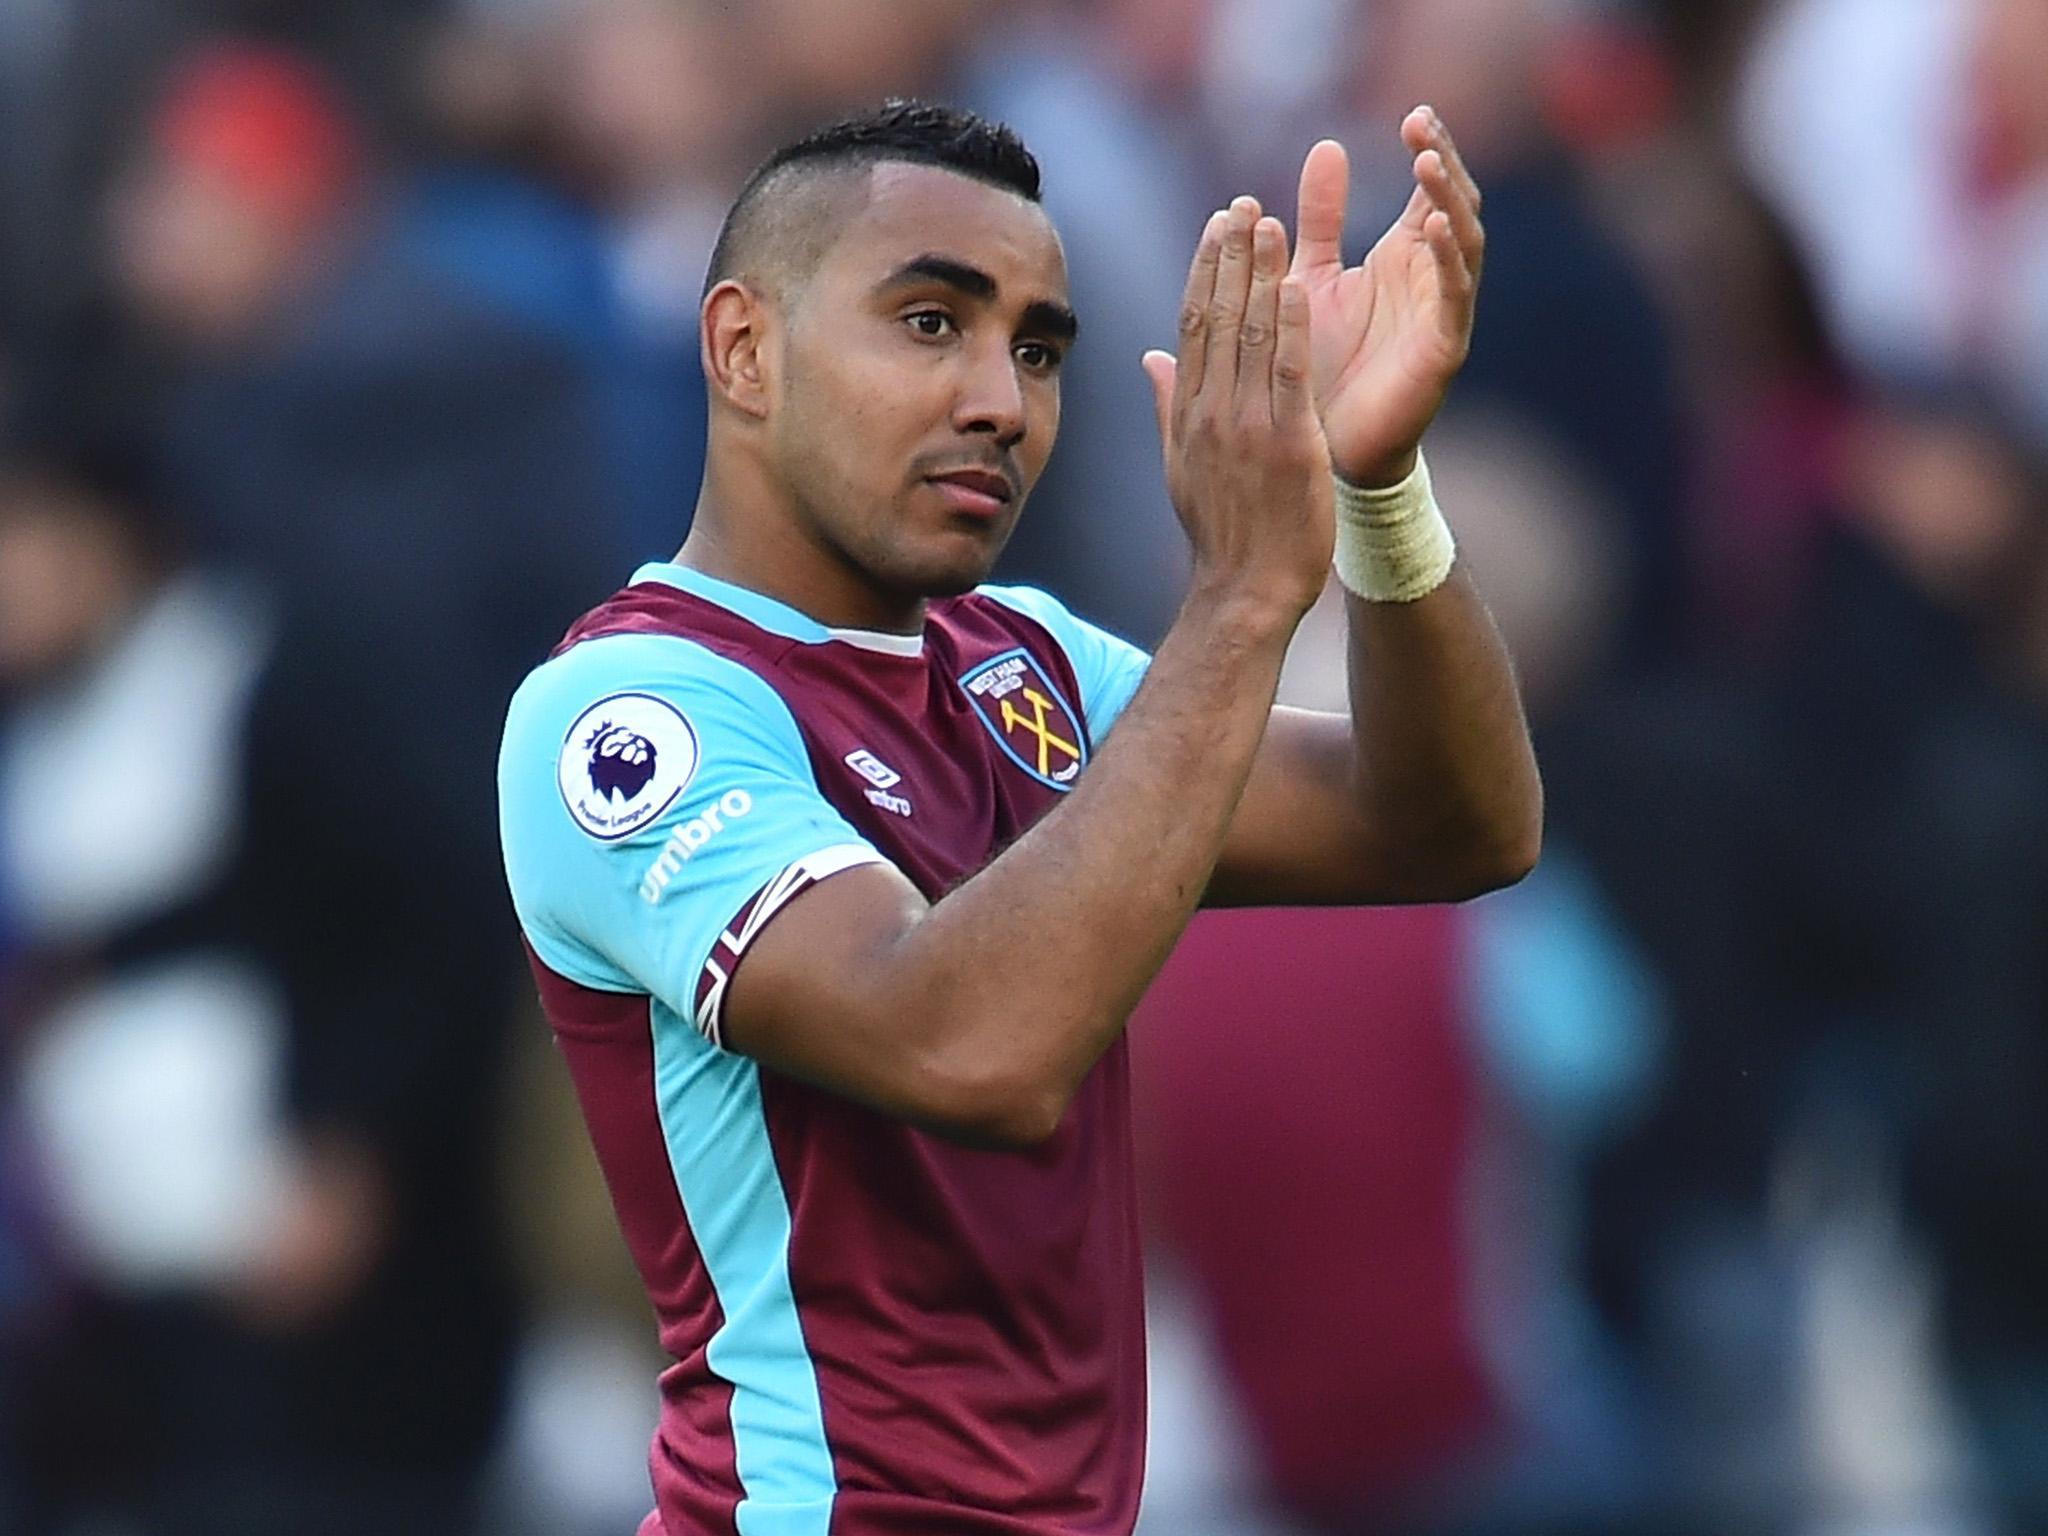 Dimitri Payet is expected to start for the Hammers on Saturday